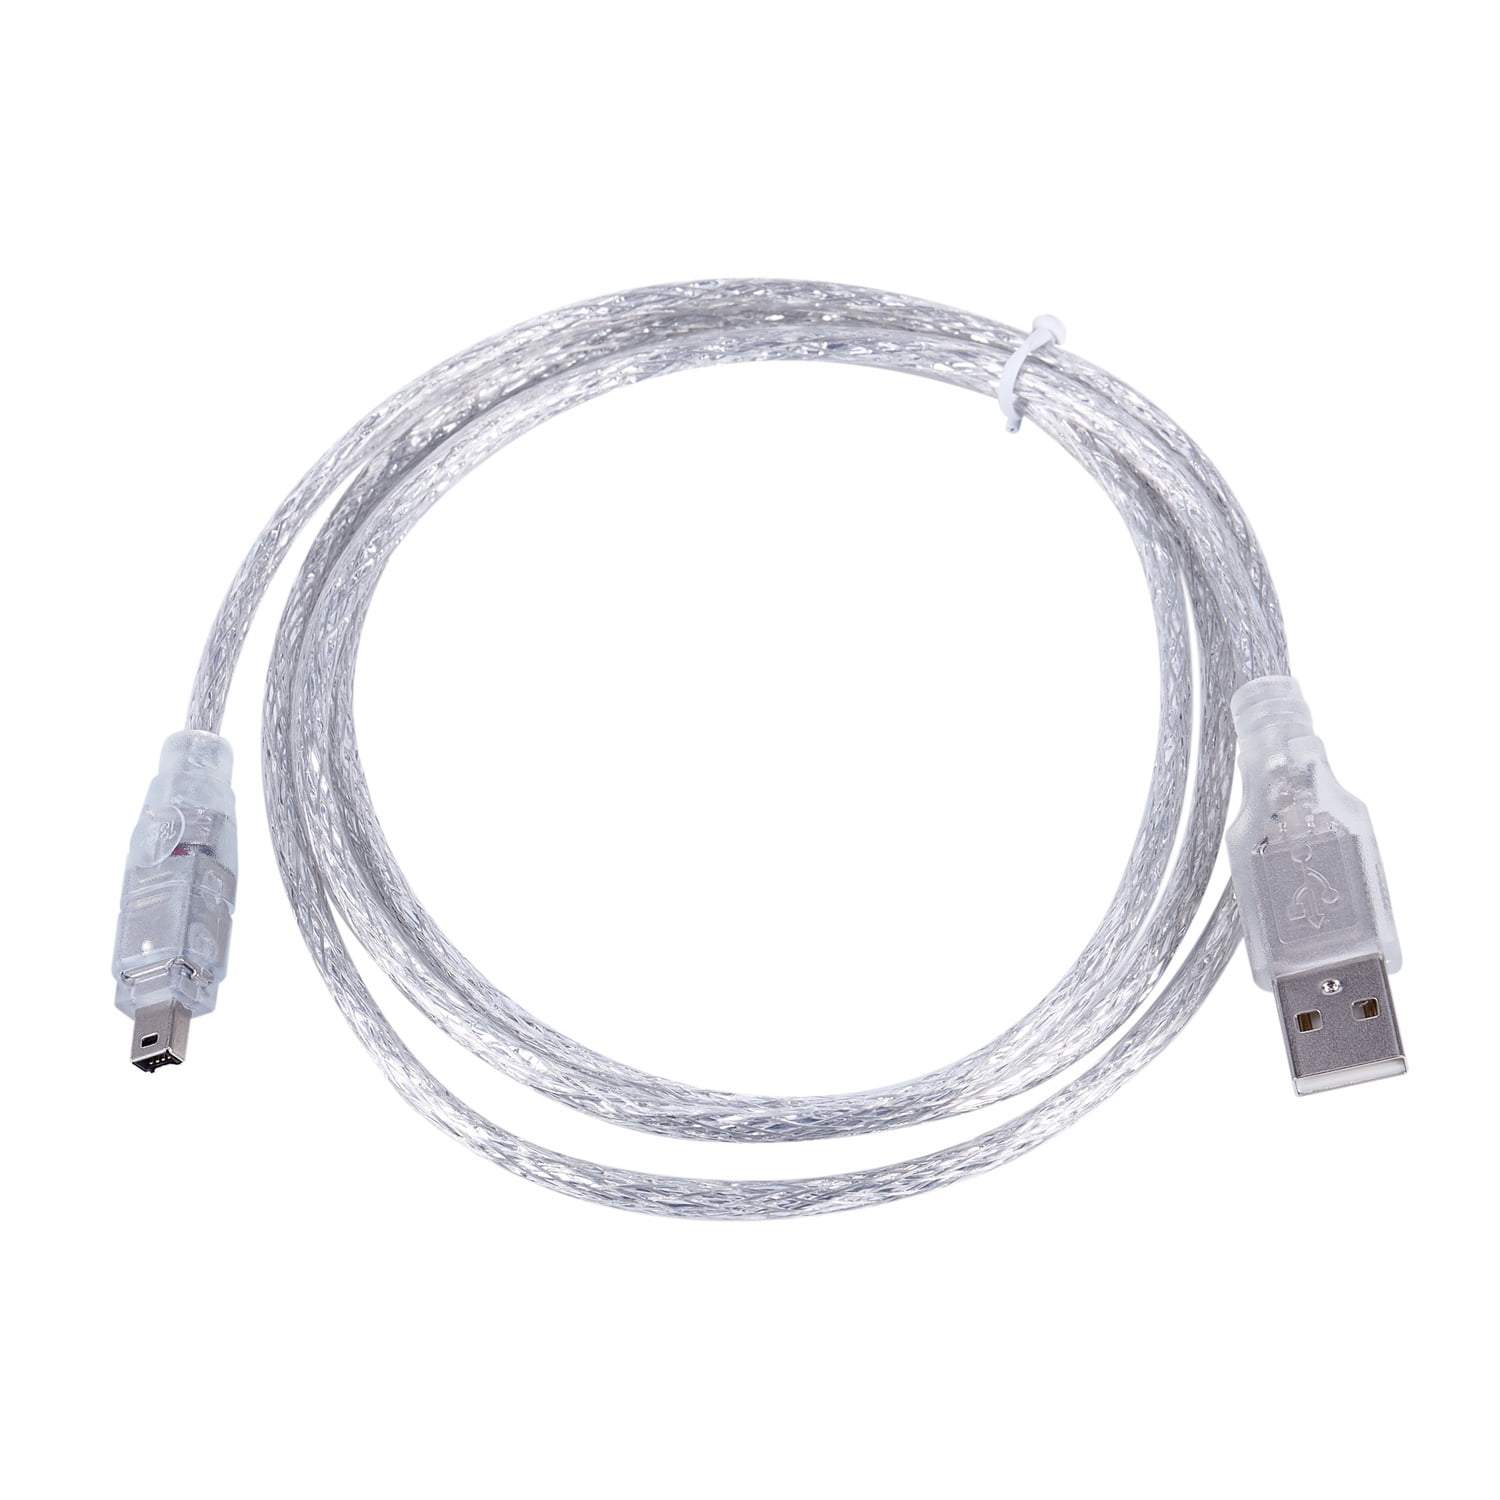 1.5M USB Data Cable IEEE 1394 4 Pin to USB Mini Plug Firewire for Mini DV HDV Camcorder to Edit